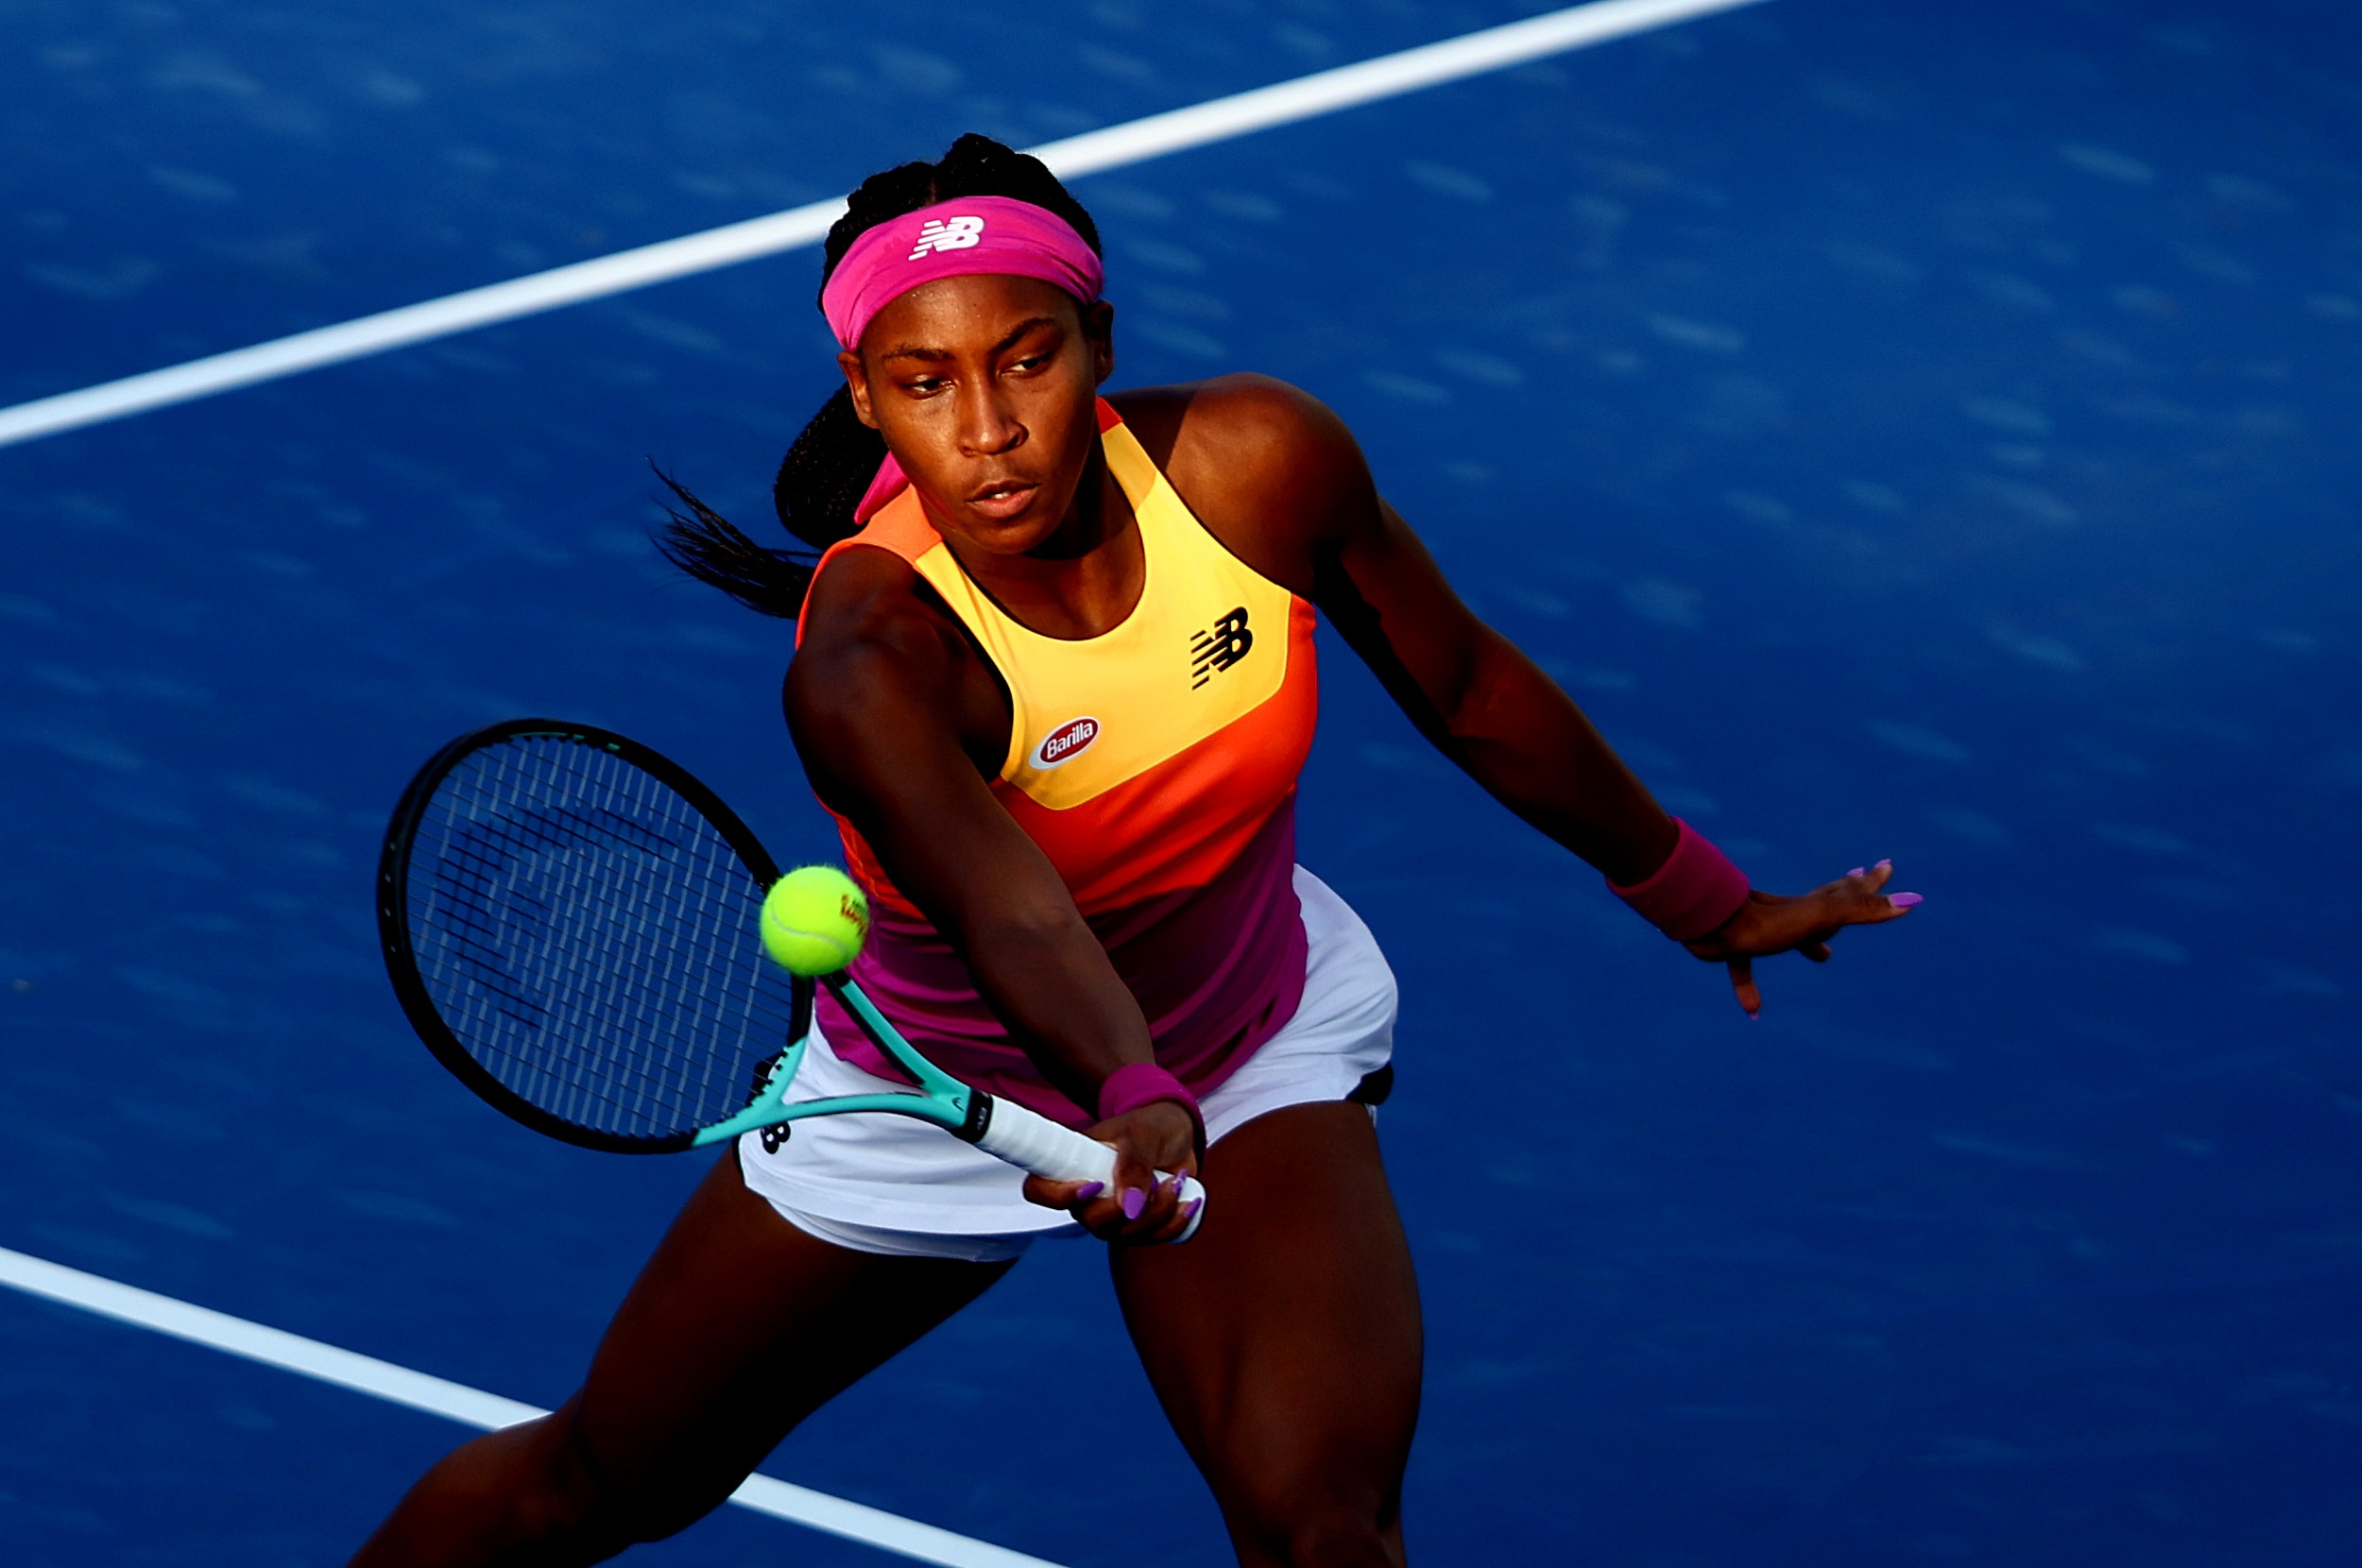 “I learned I was capable of winning a Grand Slam” a confident Coco Gauff checks in with CNN